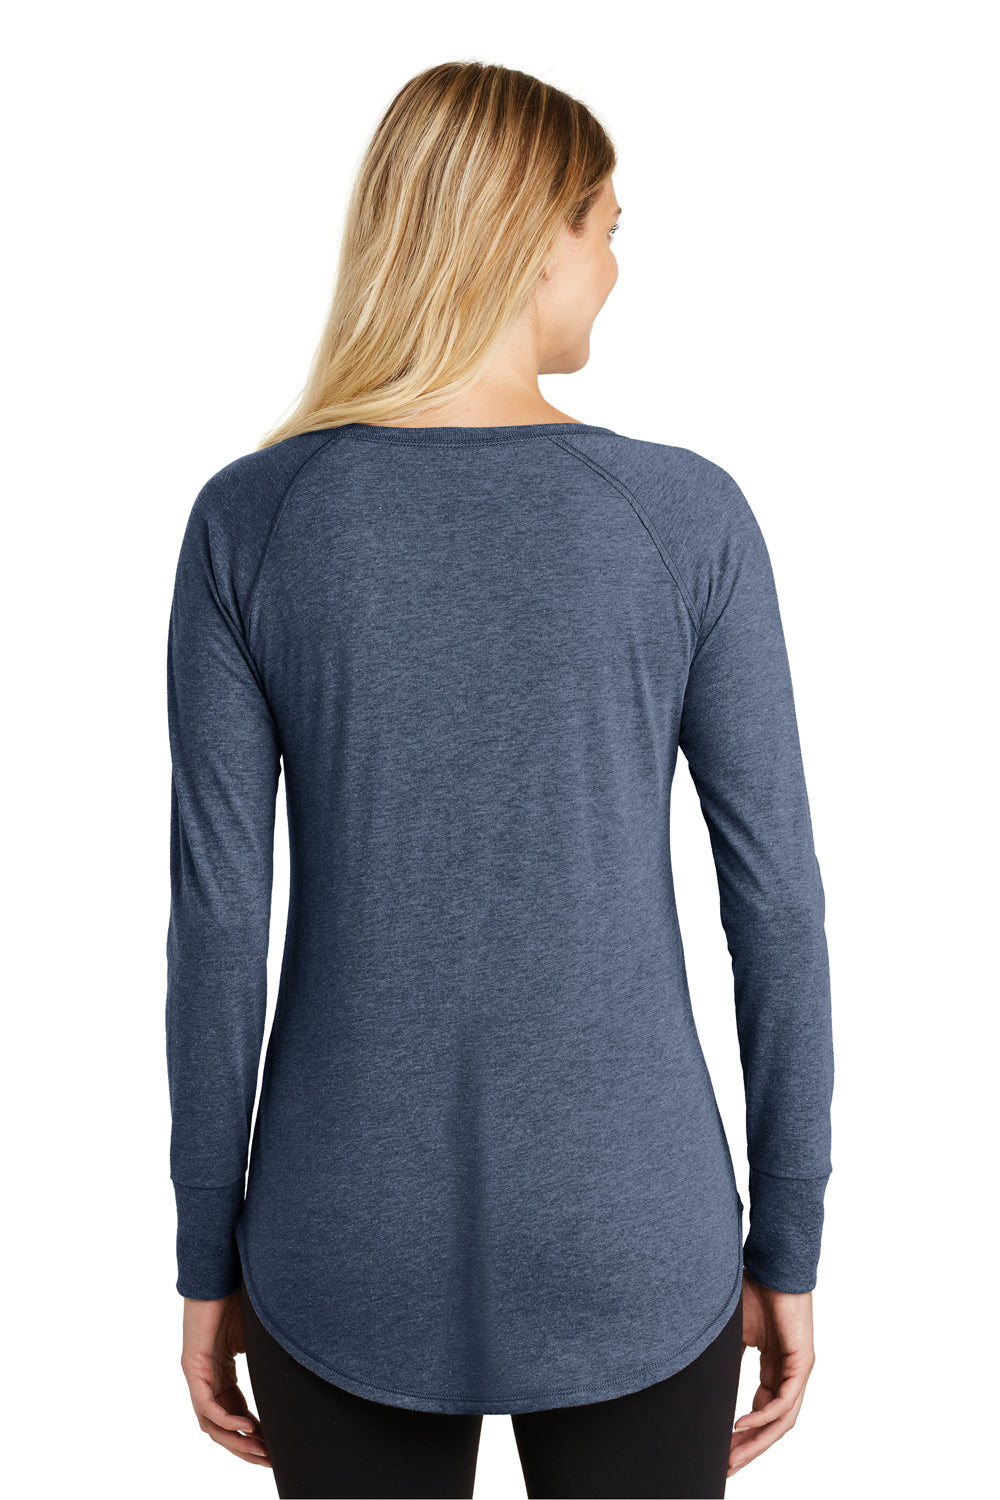 District DT132L Womens Perfect Tri Long Sleeve Crewneck T-Shirt Navy Blue Frost Back